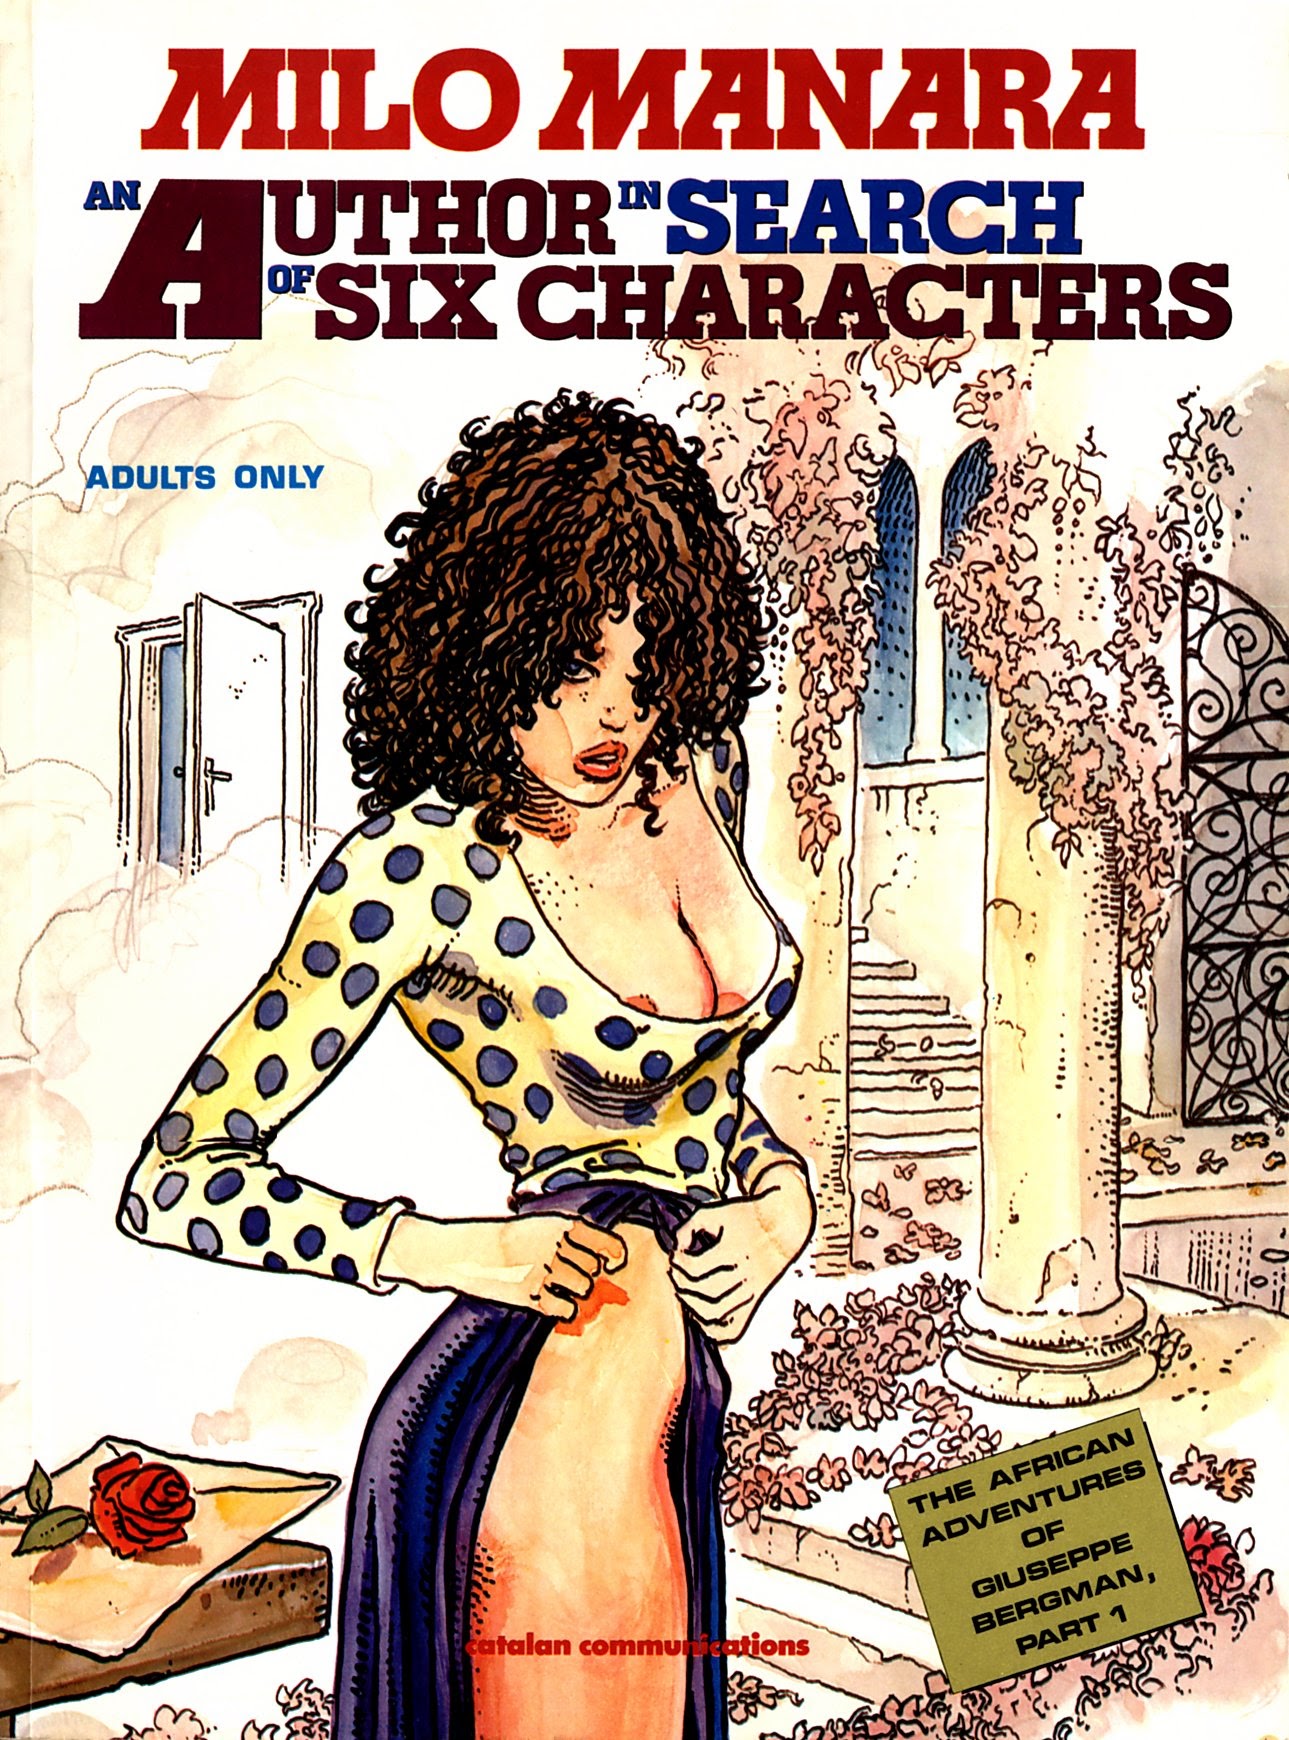 Read online An Author in Search of Six Characters comic -  Issue # Full - 1